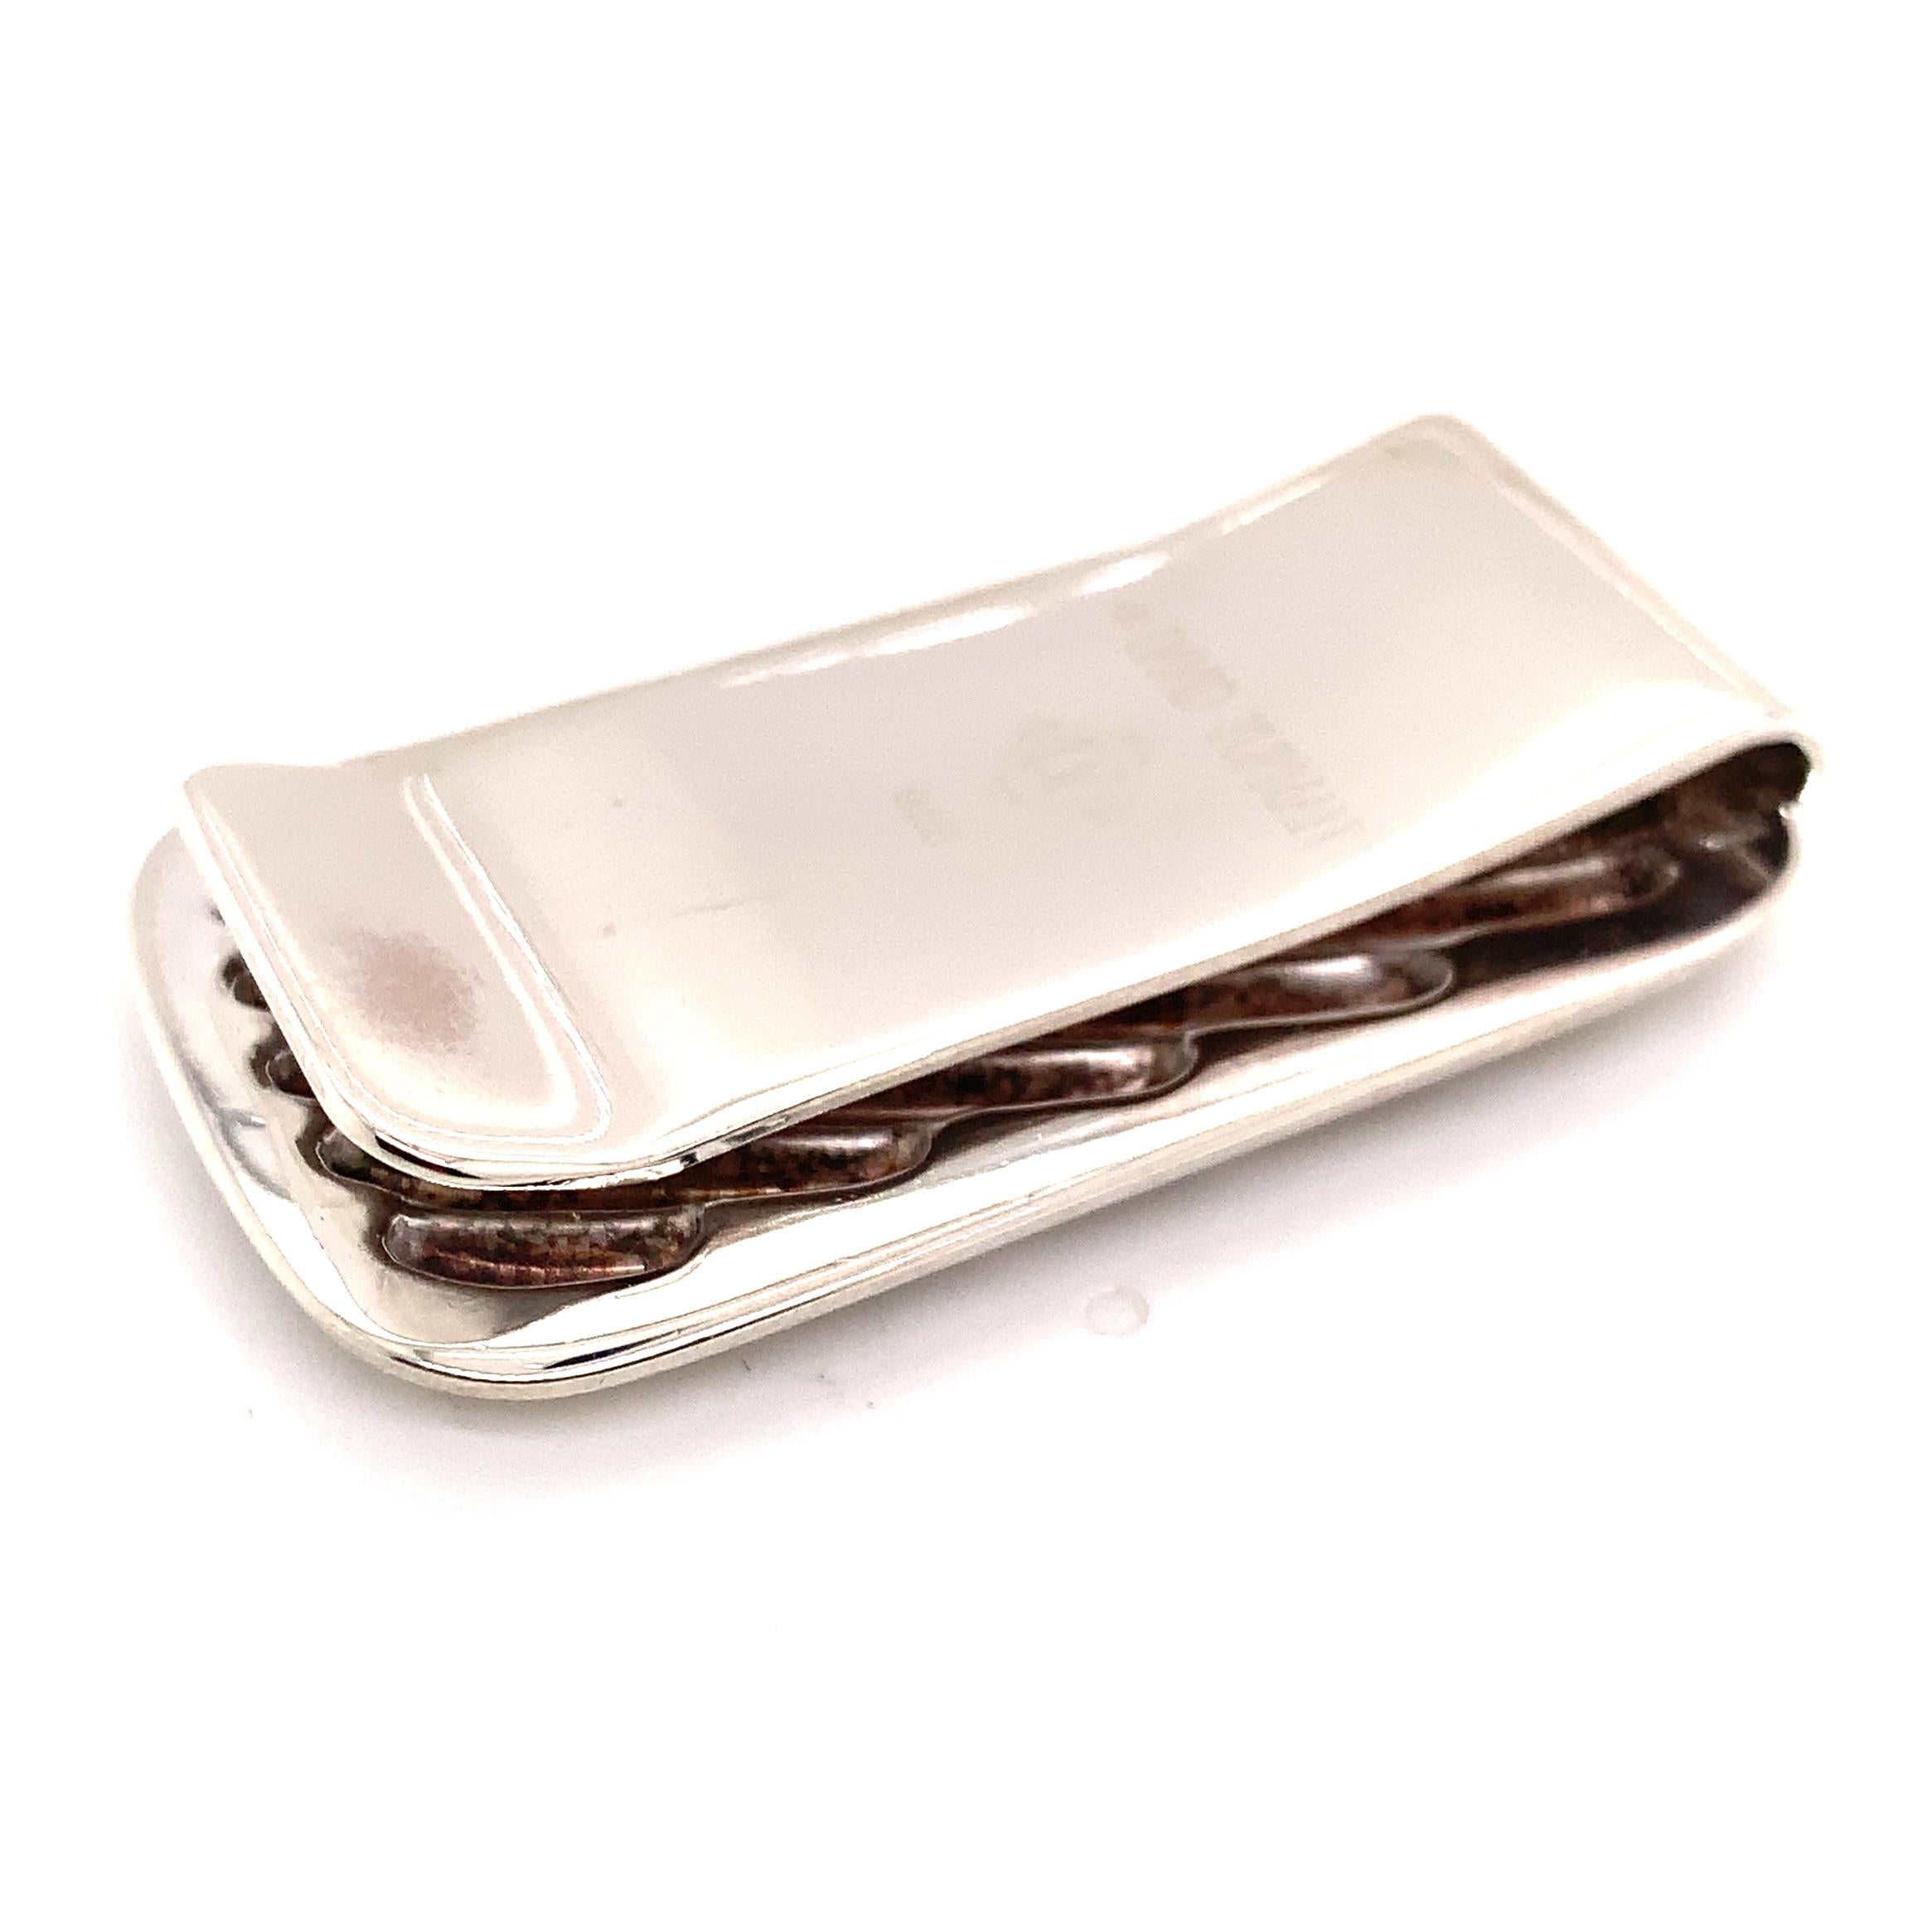 David Yurman Estate Money Clip Sterling Silver 36.70 Grams DY59

TRUSTED SELLER SINCE 2002

PLEASE SEE OUR HUNDREDS OF POSITIVE FEEDBACKS FROM OUR CLIENTS!!

FREE SHIPPING

This elegant Authentic David Yurman Men's sterling silver money clip has a